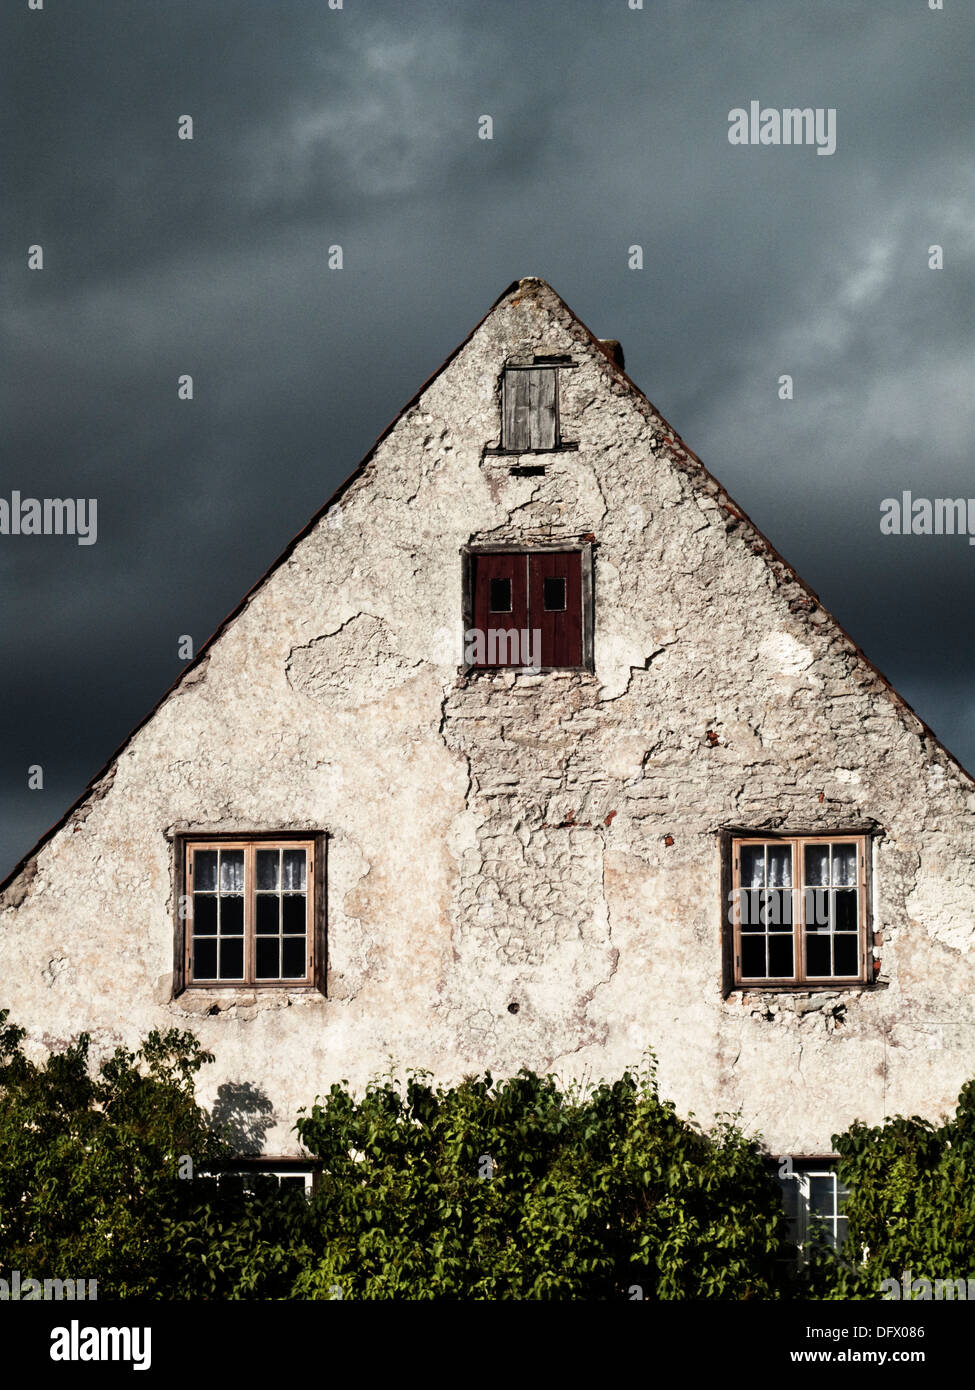 Profile of Old Rustic Cottage with Sloping Roof Against Ominous Gray Sky Stock Photo